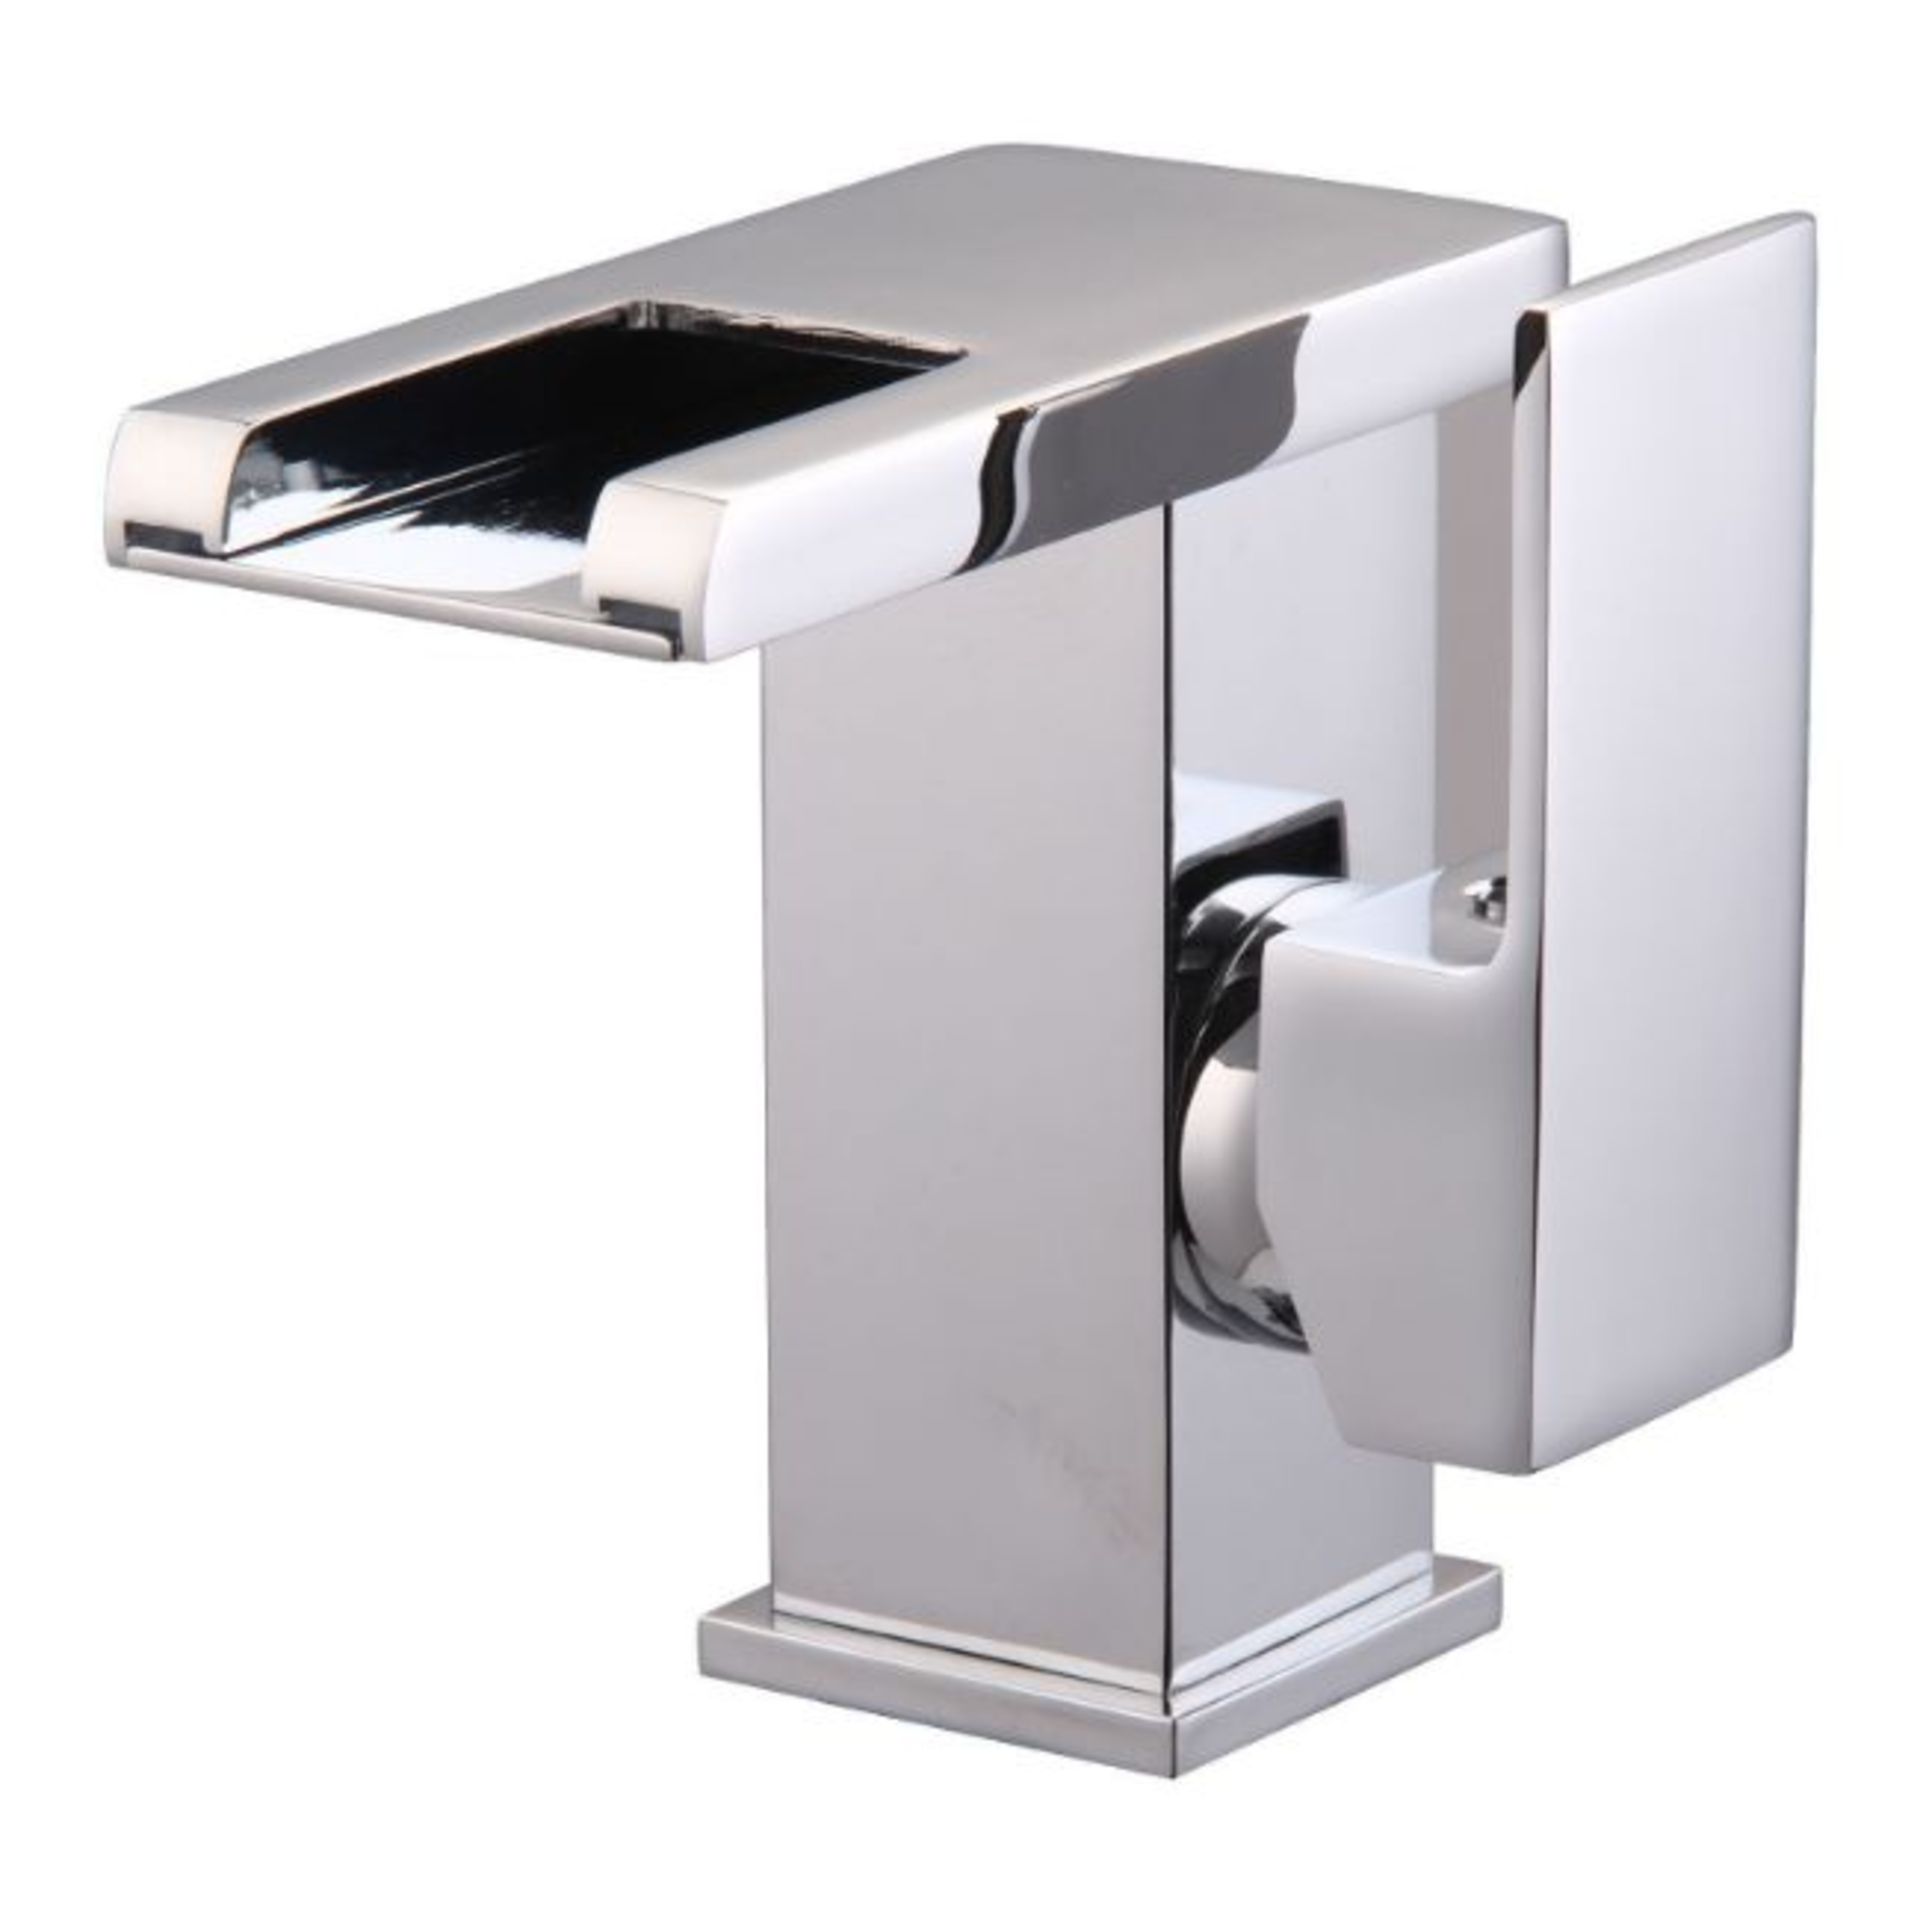 LED Waterfall Bathroom Basin Mixer Tap. RRP £229.99.Easy to install and clean. All copper mo... - Image 2 of 2